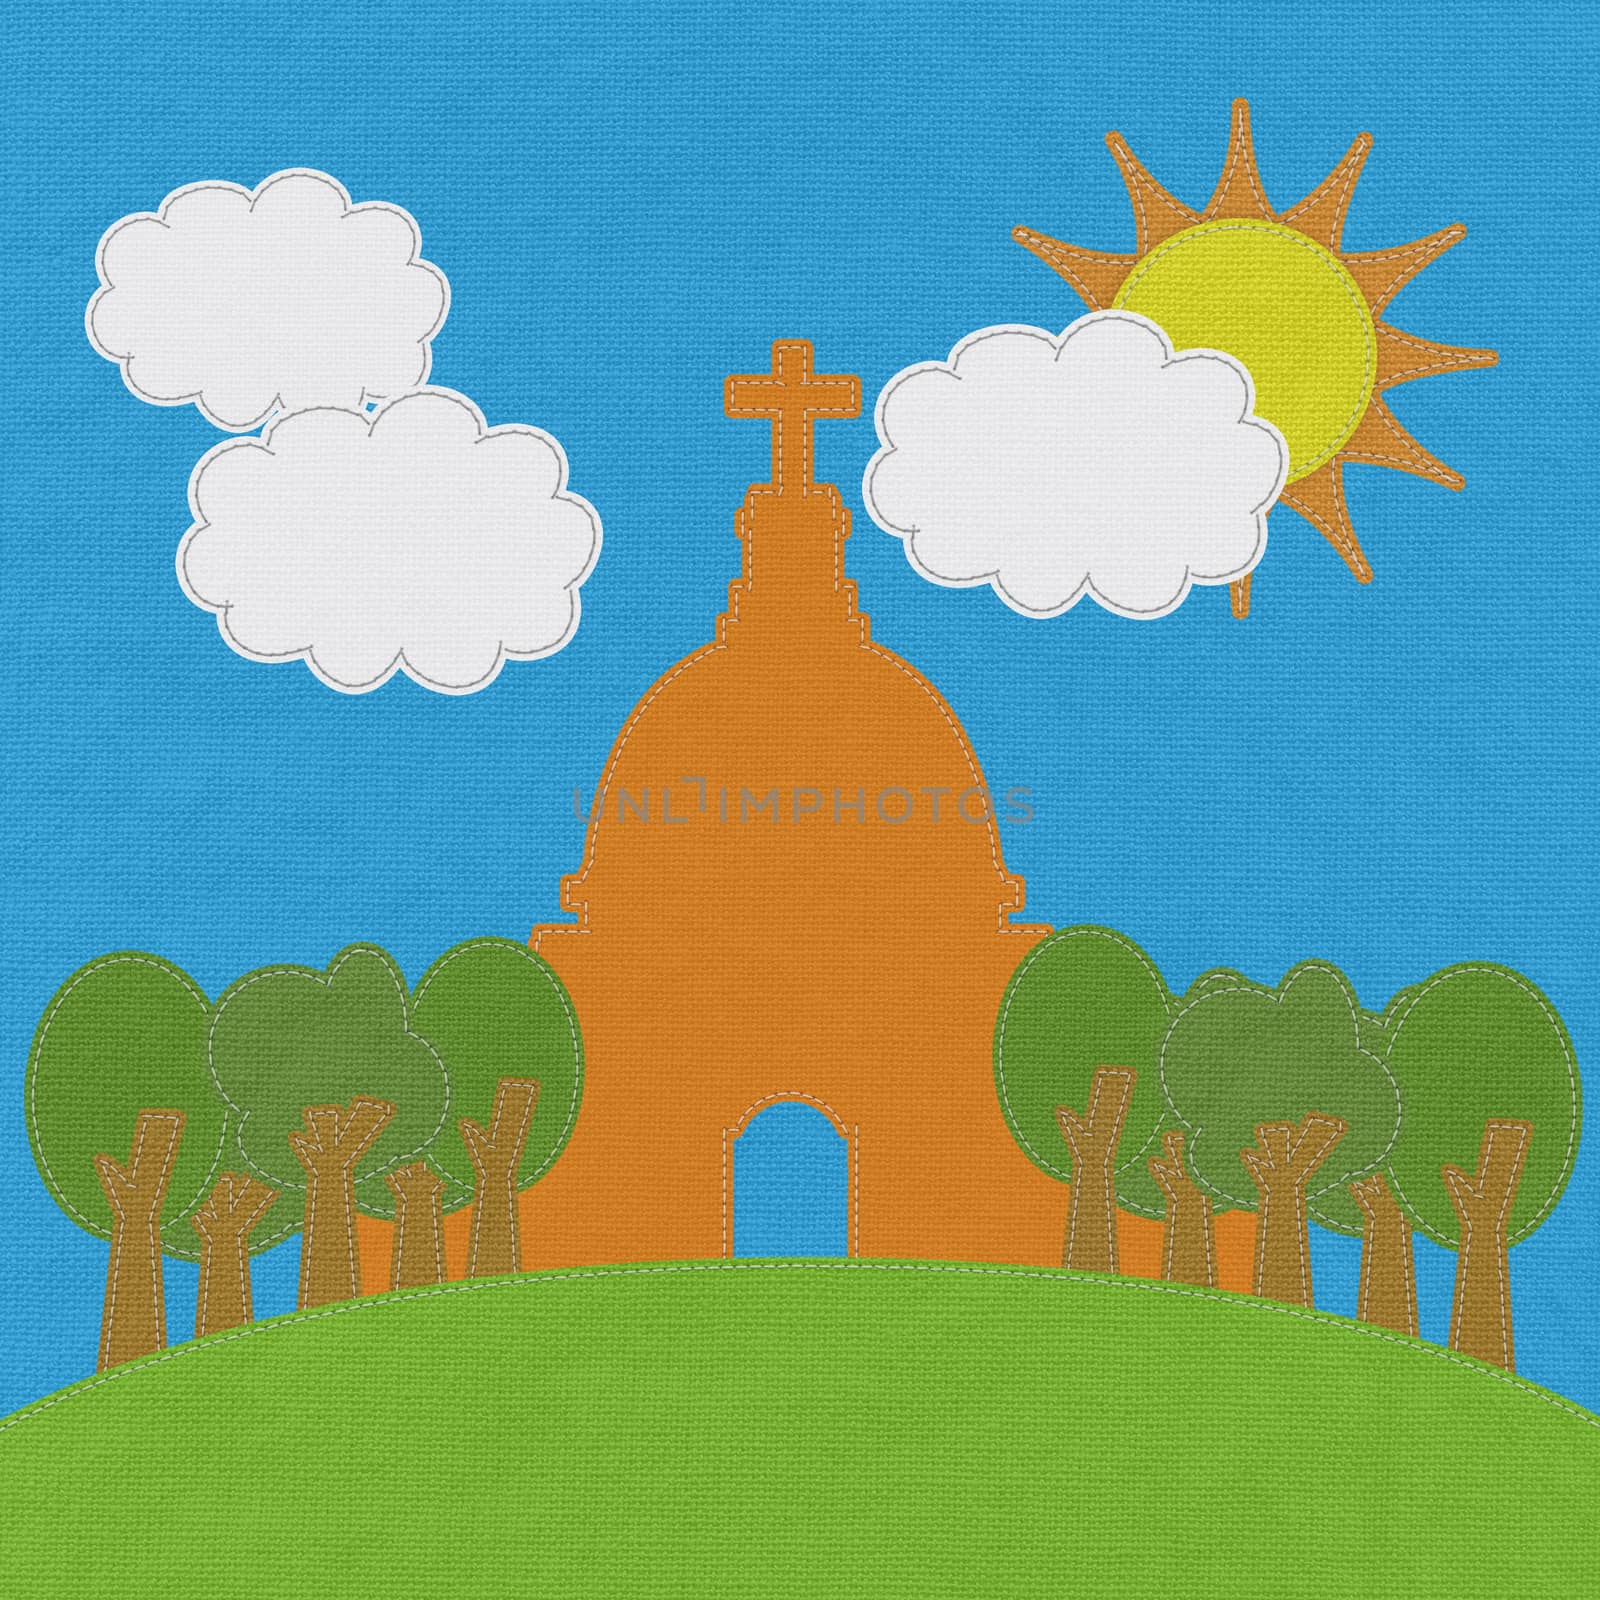 Chruch in stitch style on fabric background by basketman23